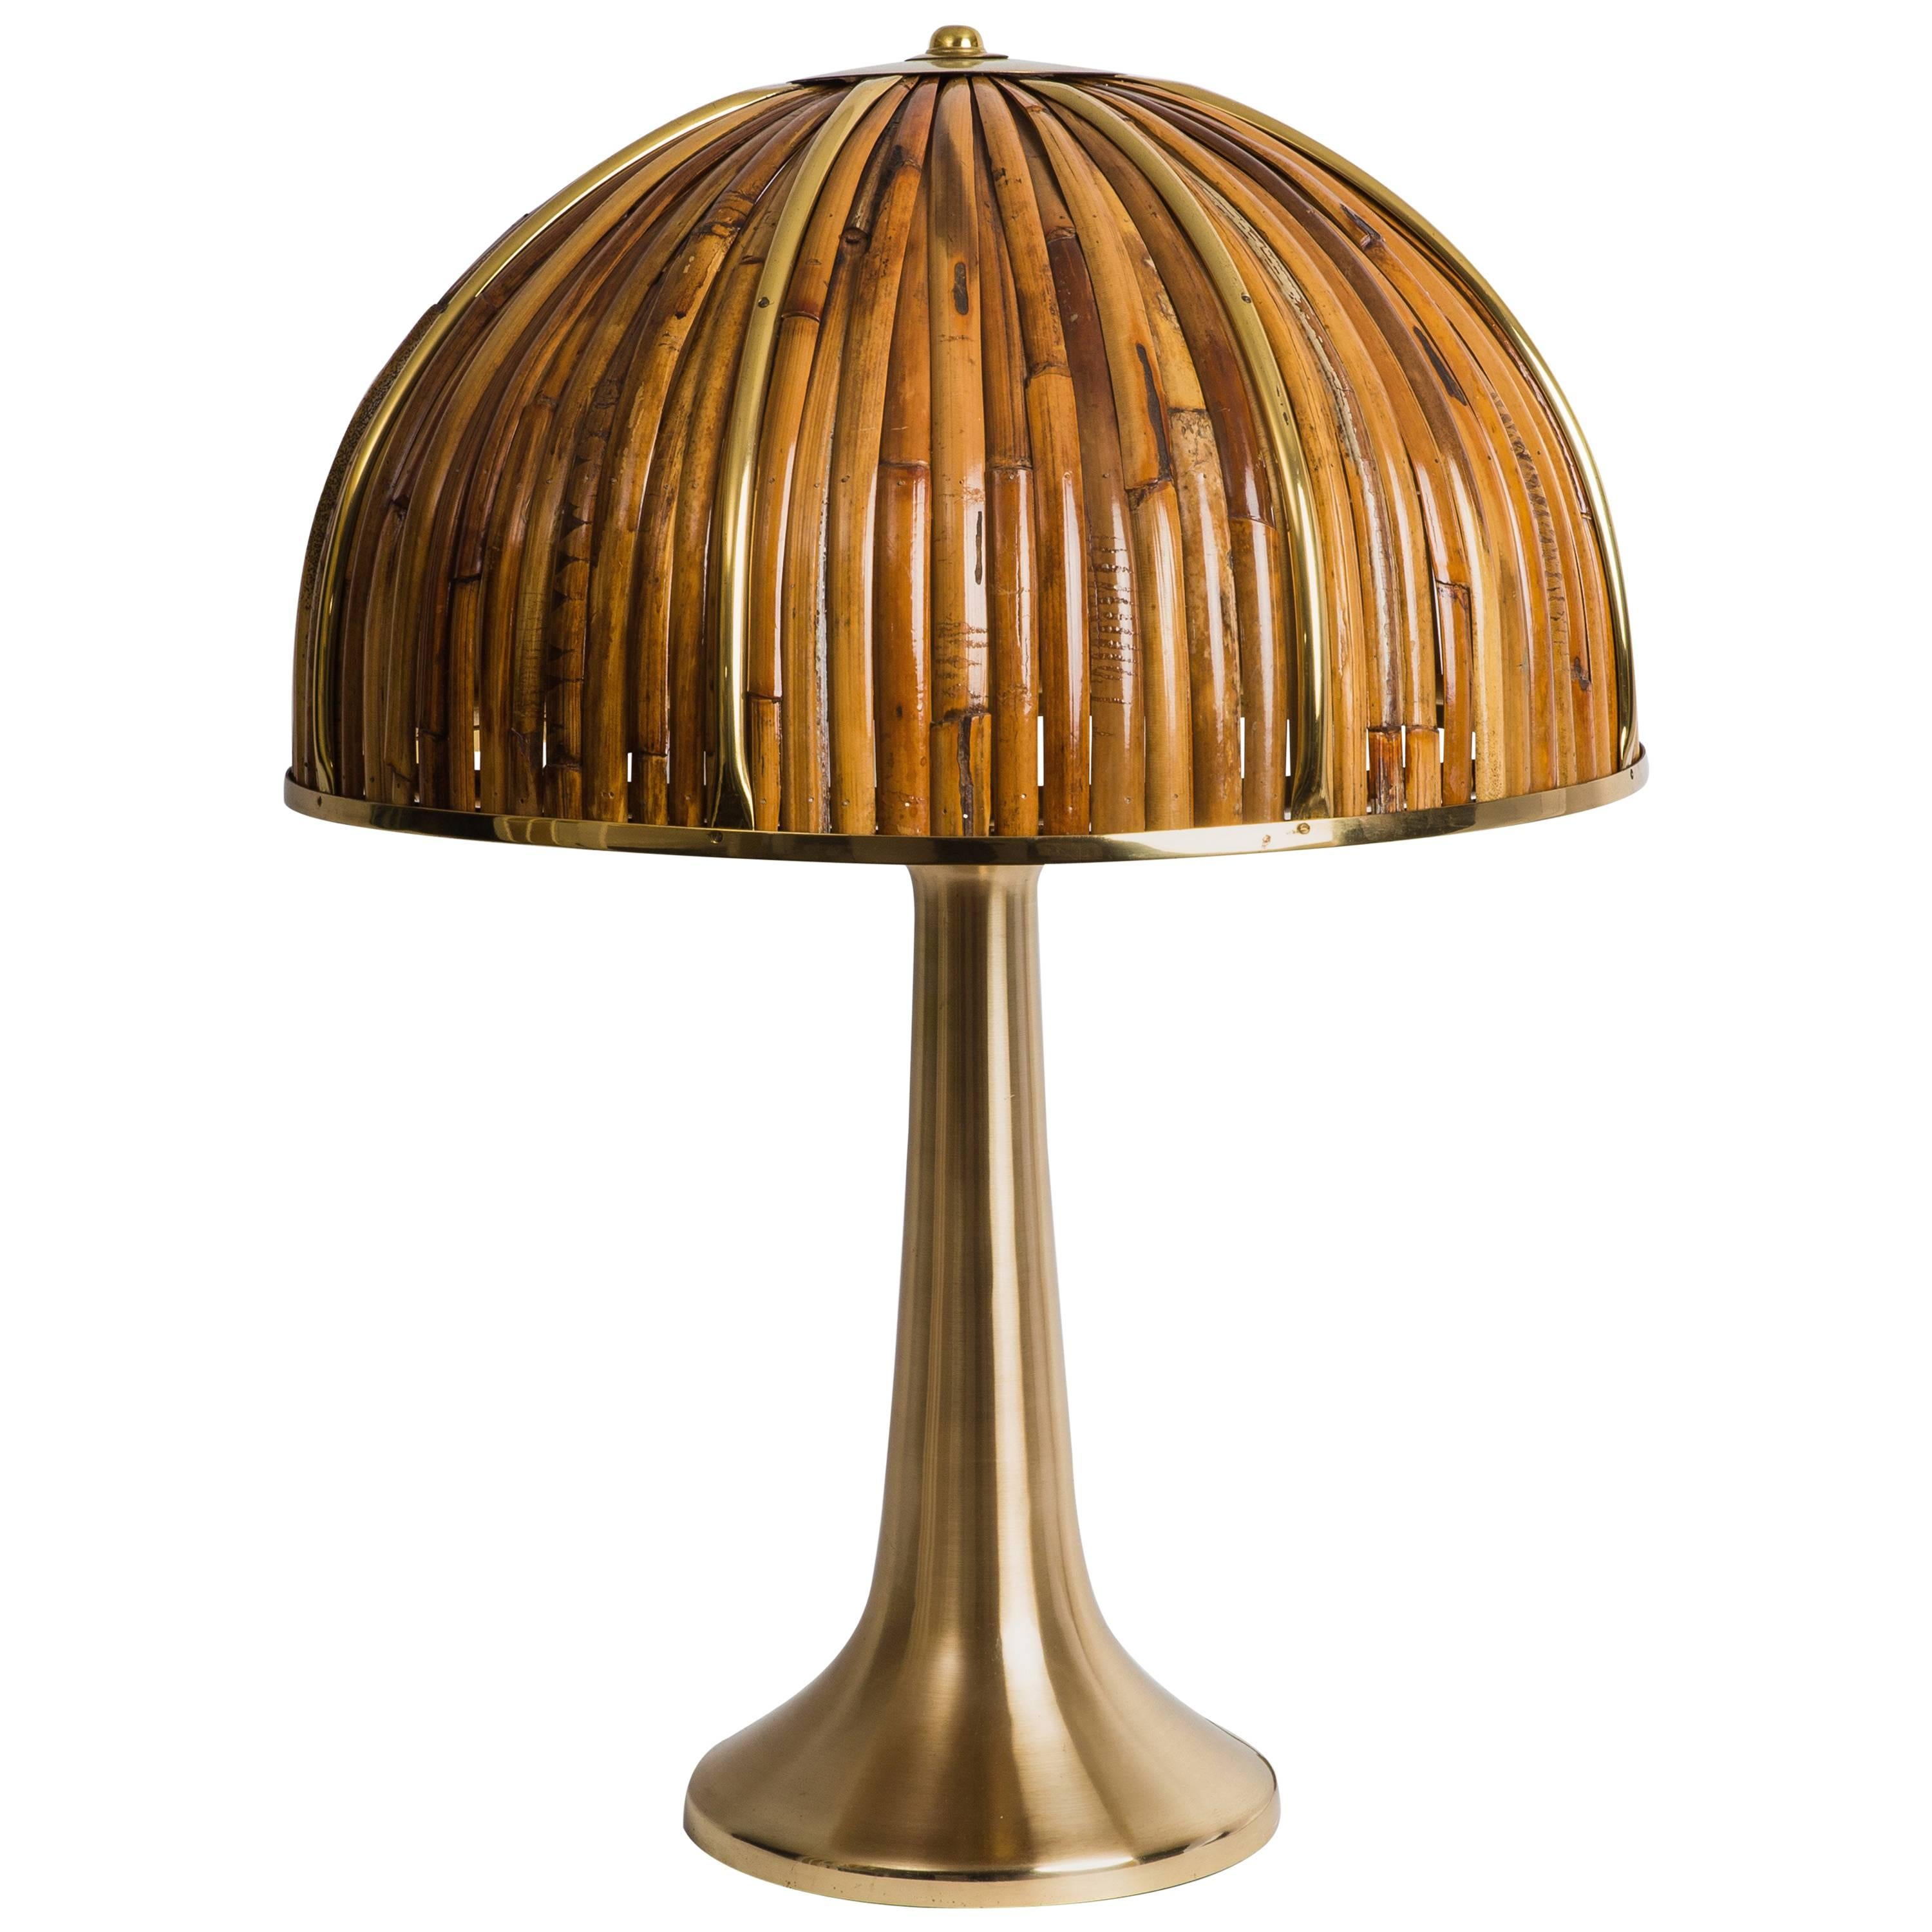 Gabriella Crespi Signed 'Fungo' Table Lamp from Rising Sun Series, Italy, 1970s